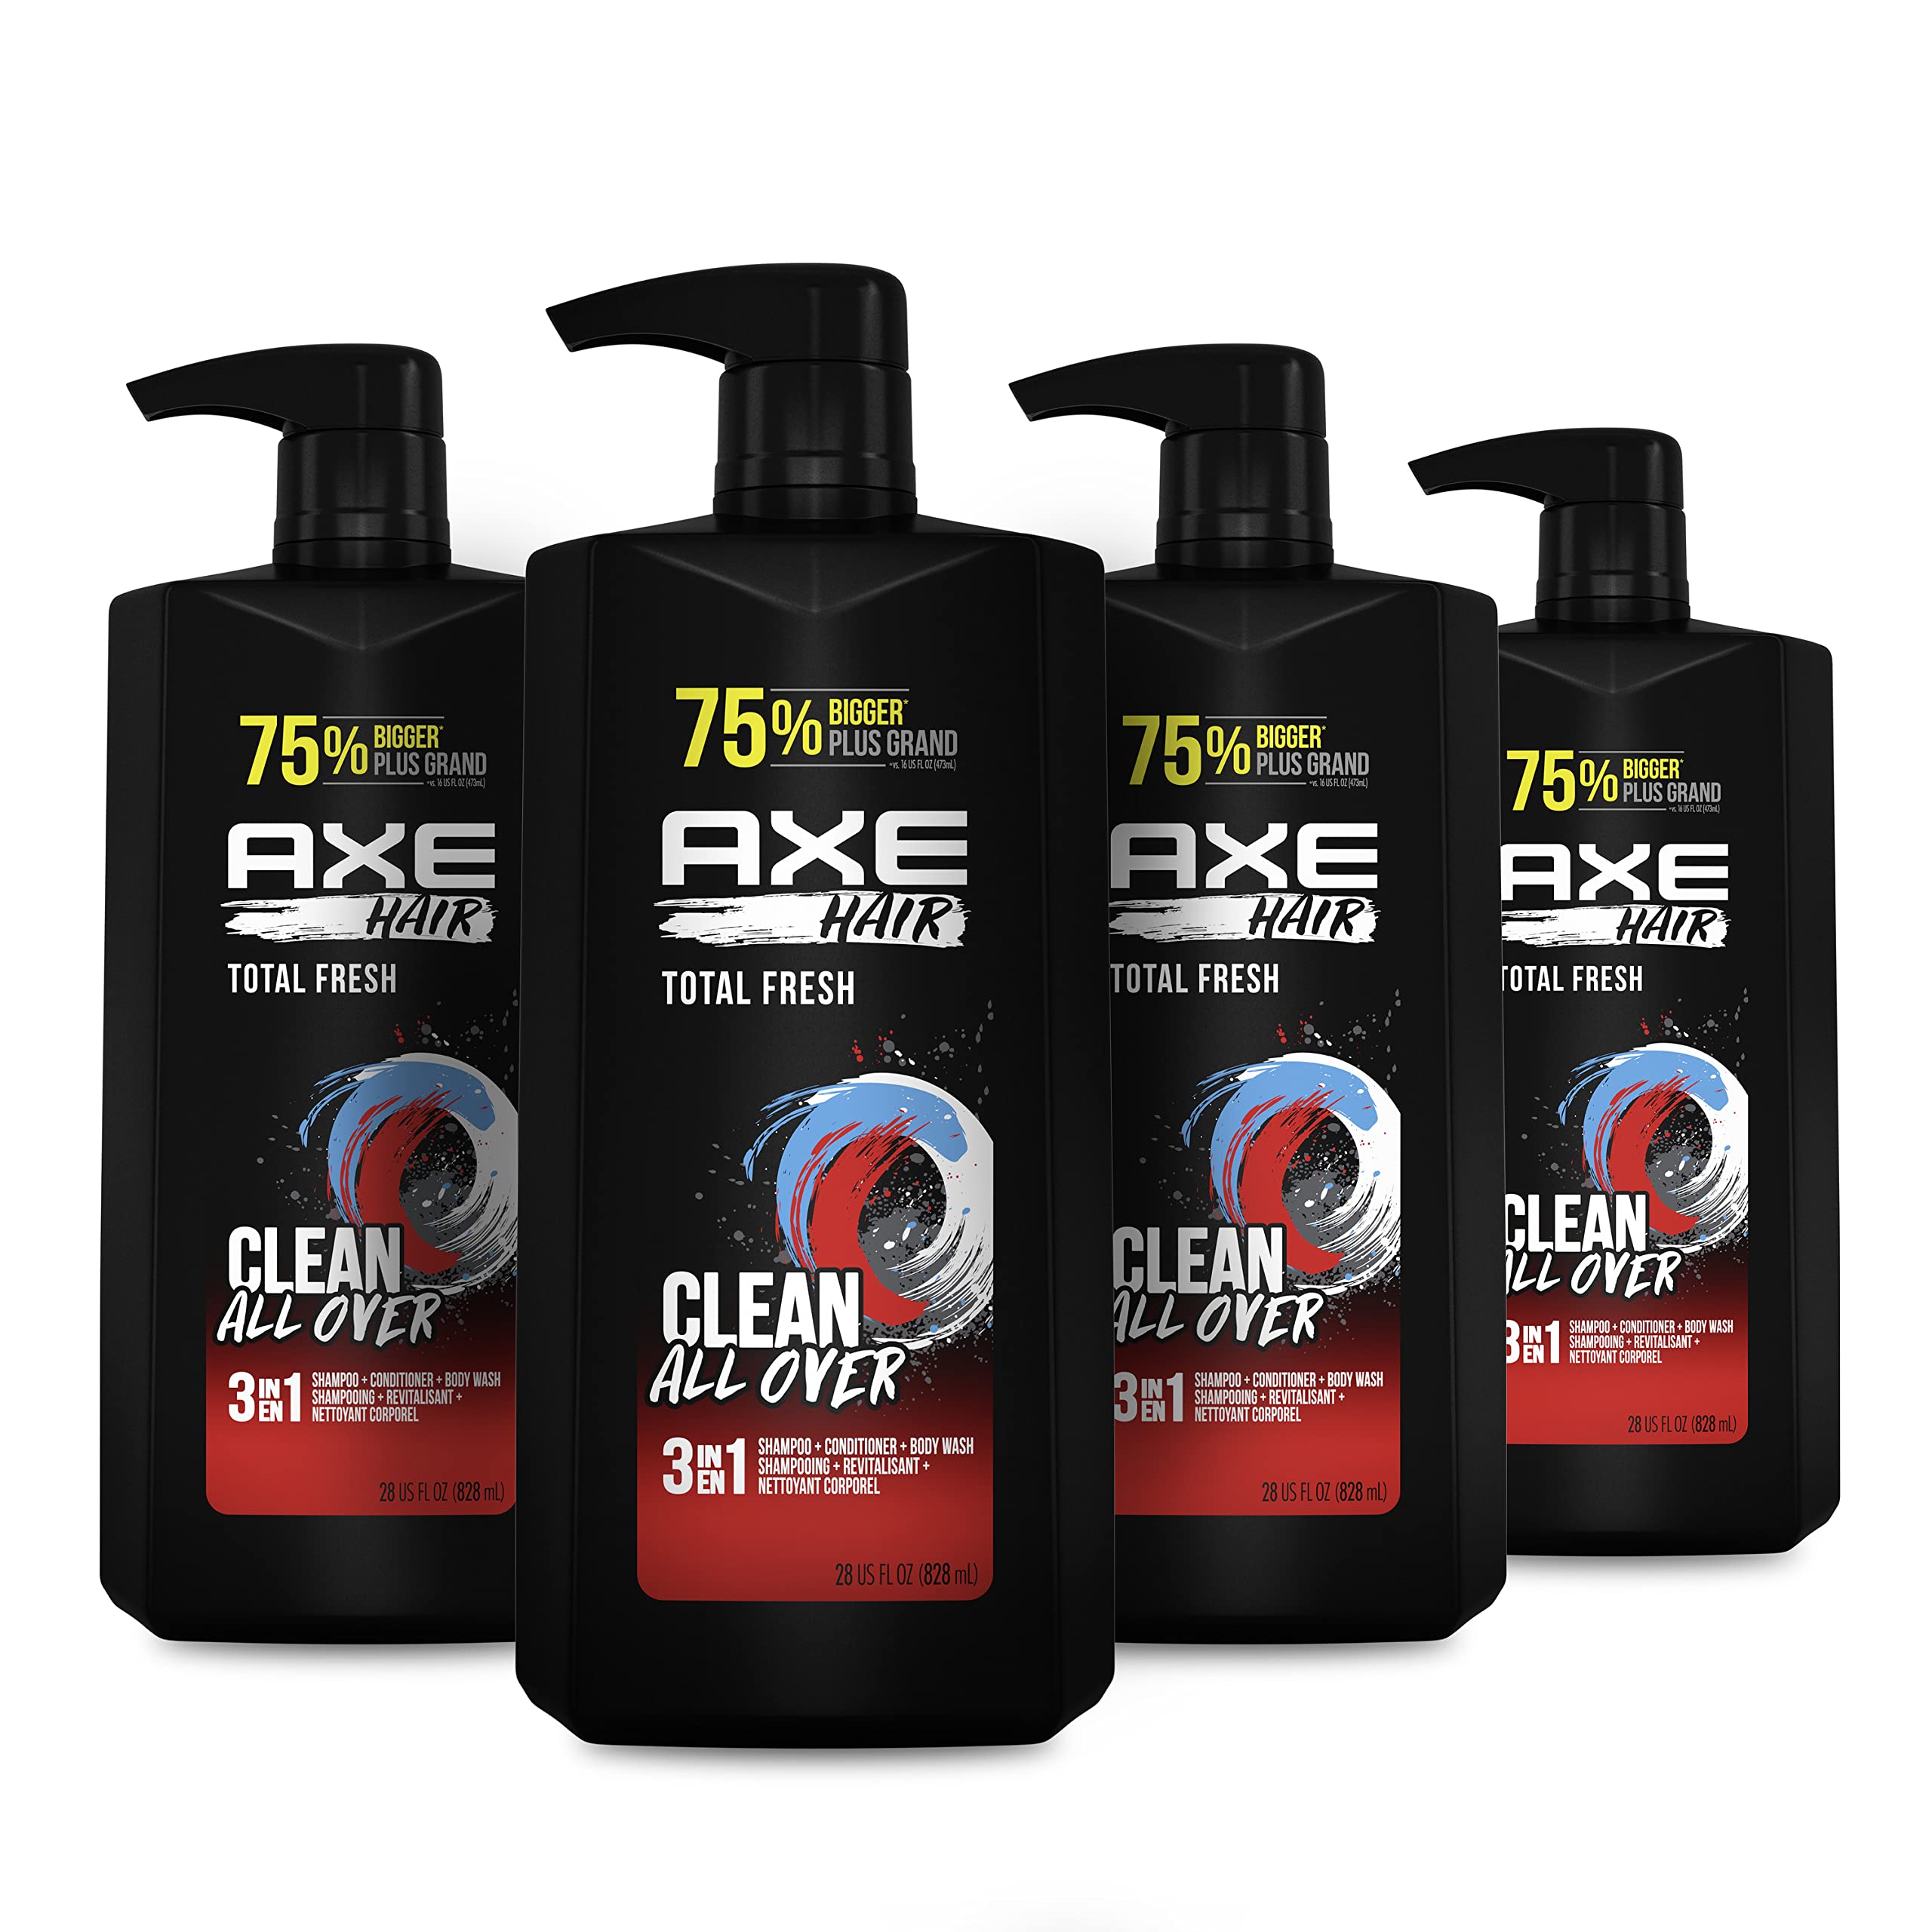 AXE 3-in-1 Body Wash Shampoo and Conditioner Easy Hair and Body Wash For Men Wash and Care Total Fresh Light and Fresh Scent Men's Shampoo 28 oz 4 Pack